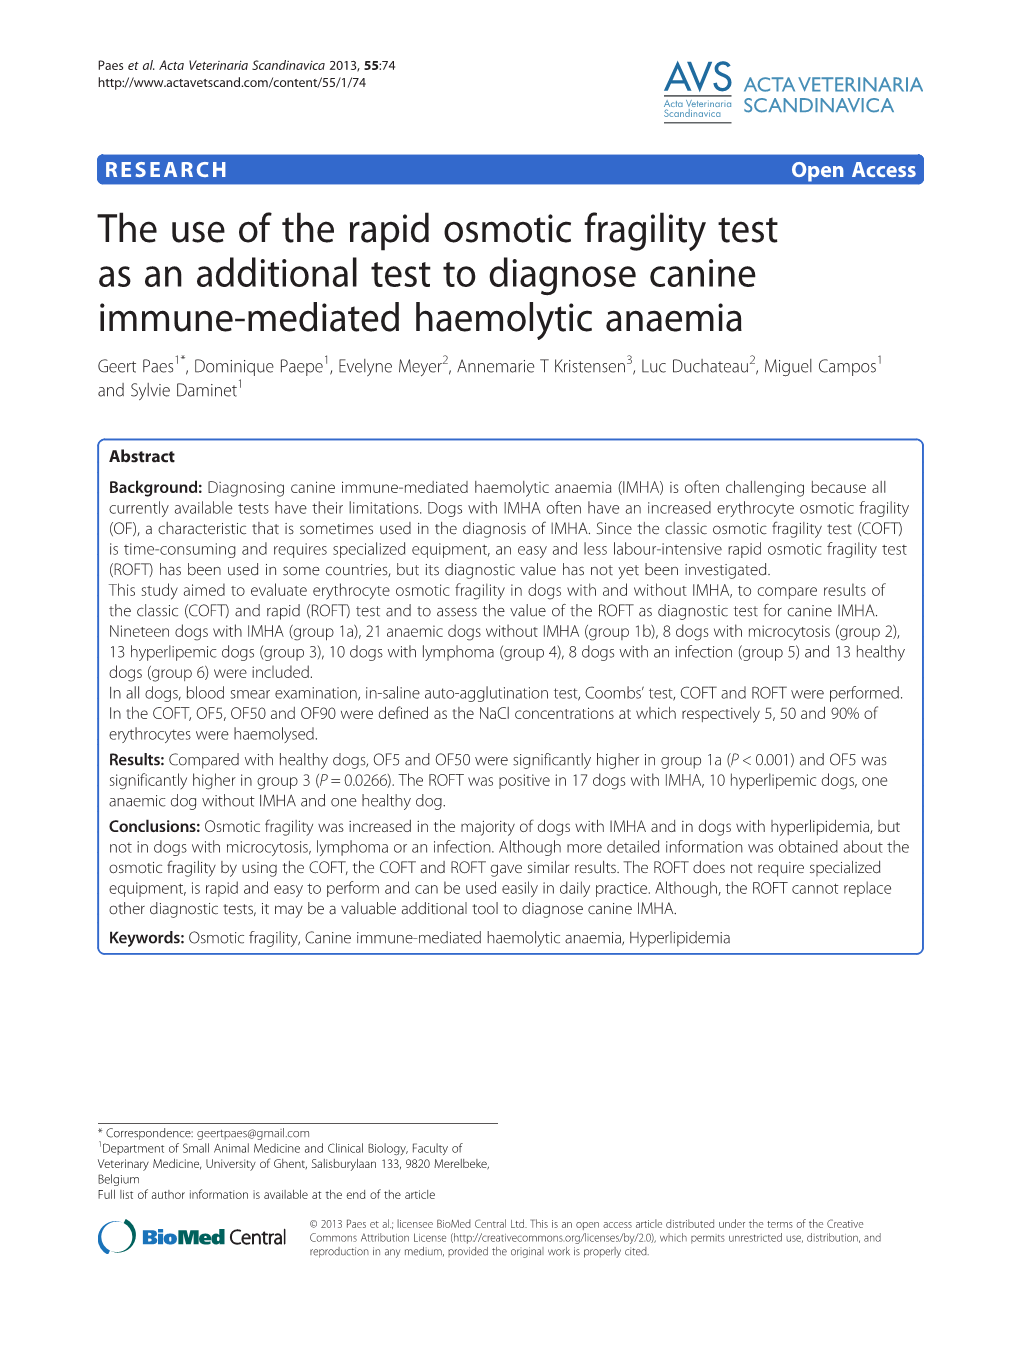 The Use of the Rapid Osmotic Fragility Test As an Additional Test To